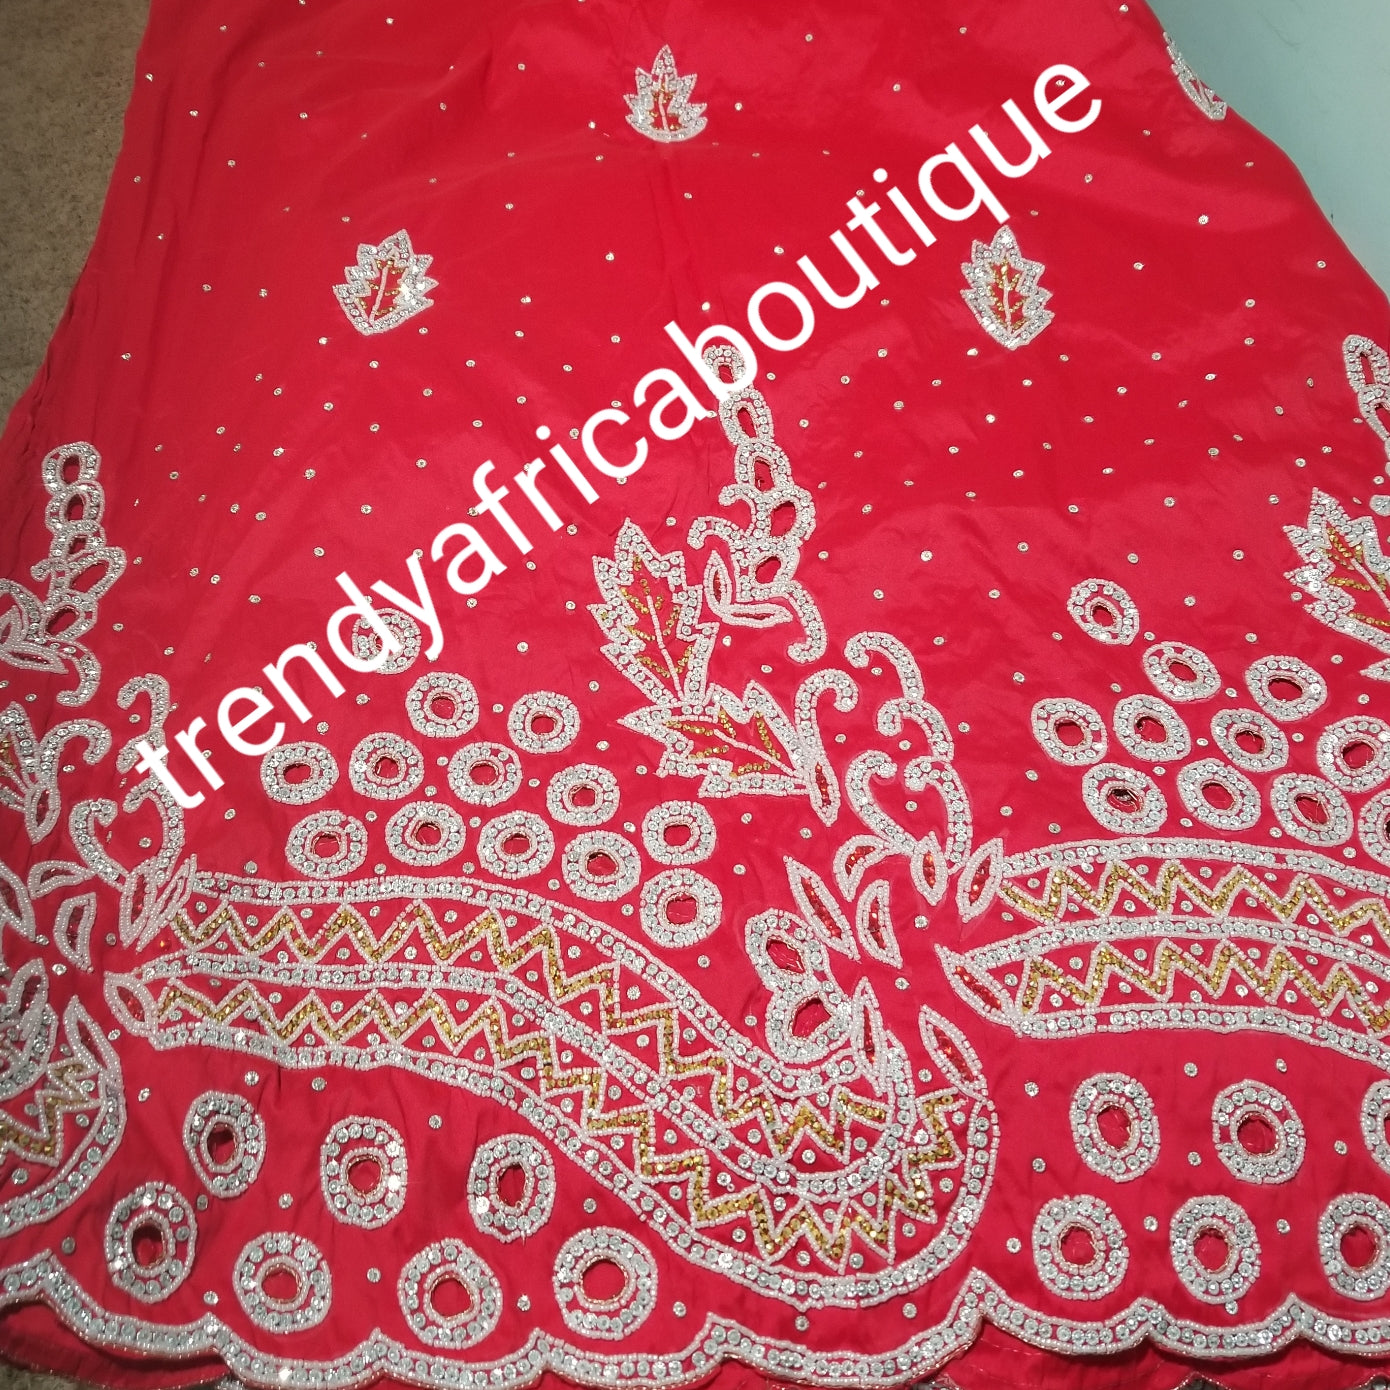 Sale: original quality Taffeta Silk George. Red George Embellished with silver crystal stones for Nigerian traditional wedding/party outfit. Come as 2.5yds+2.5yds +1.8yds matching net. Aso-ebi order available